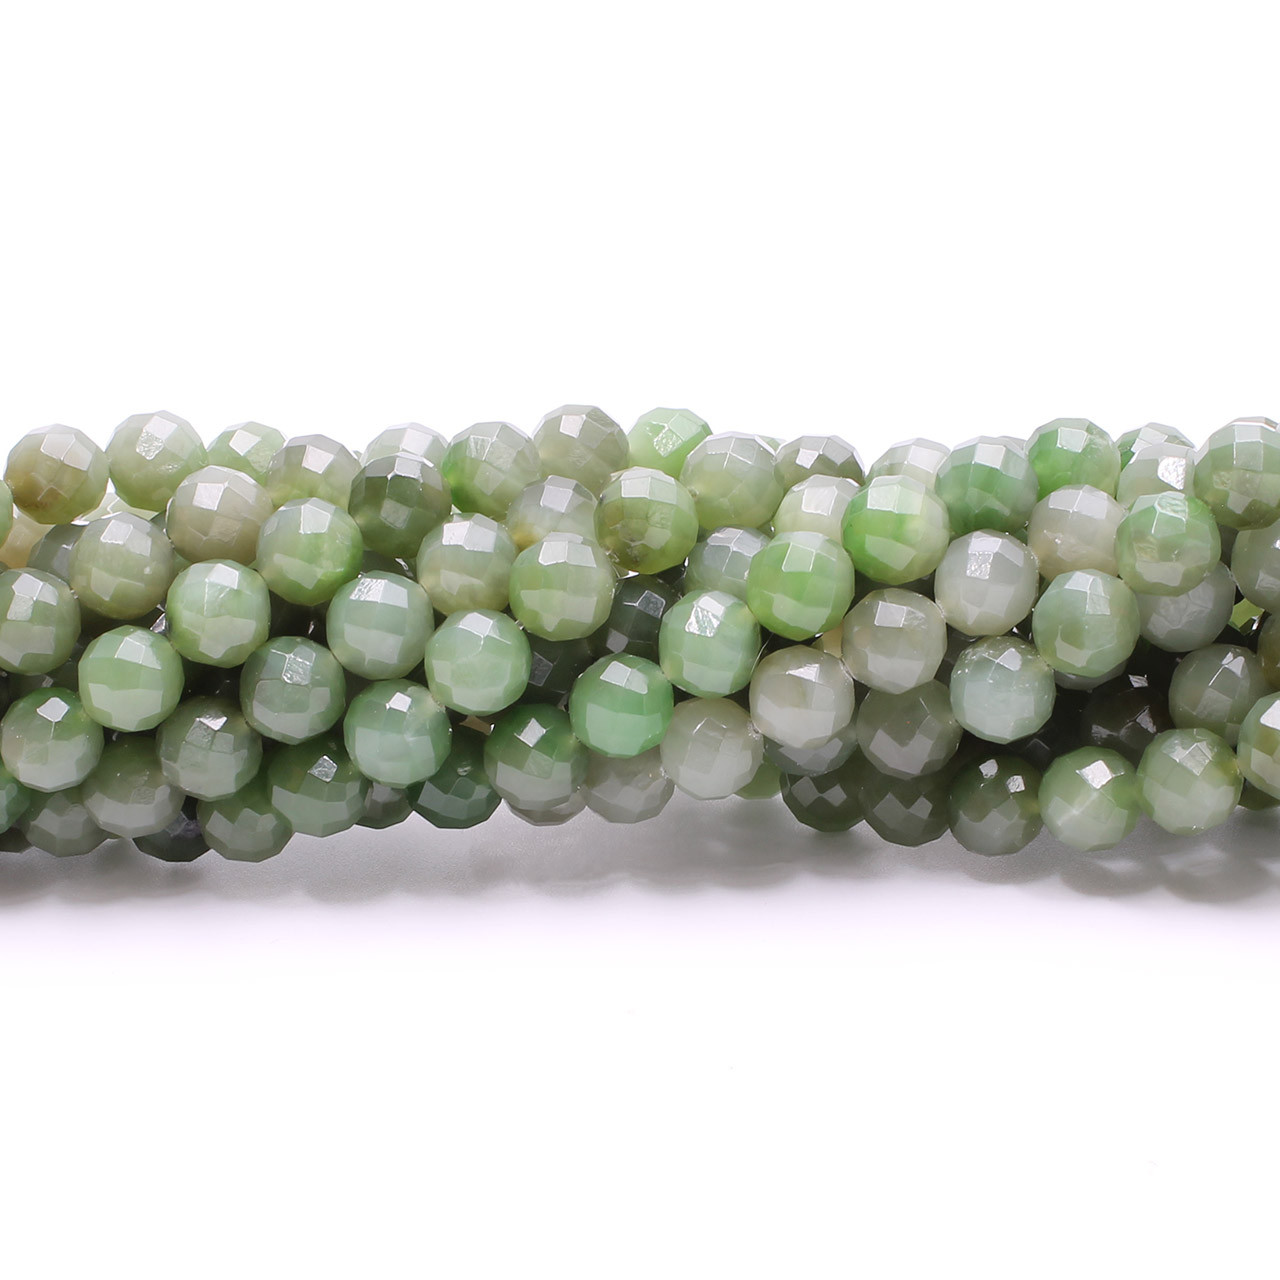 Natural Nephrite Hua Show Jade Faceted Round Beads For Jewelry Making  Strand 15